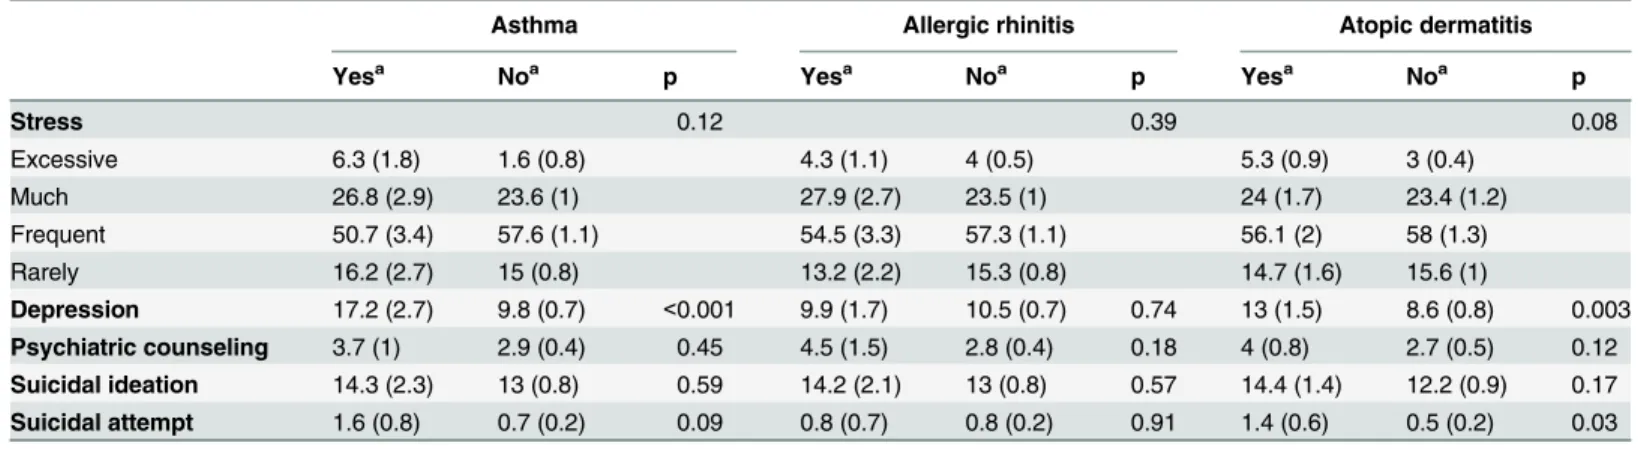 Table 2. Prevalence of psychological problems in Korean adolescents with allergic diseases.